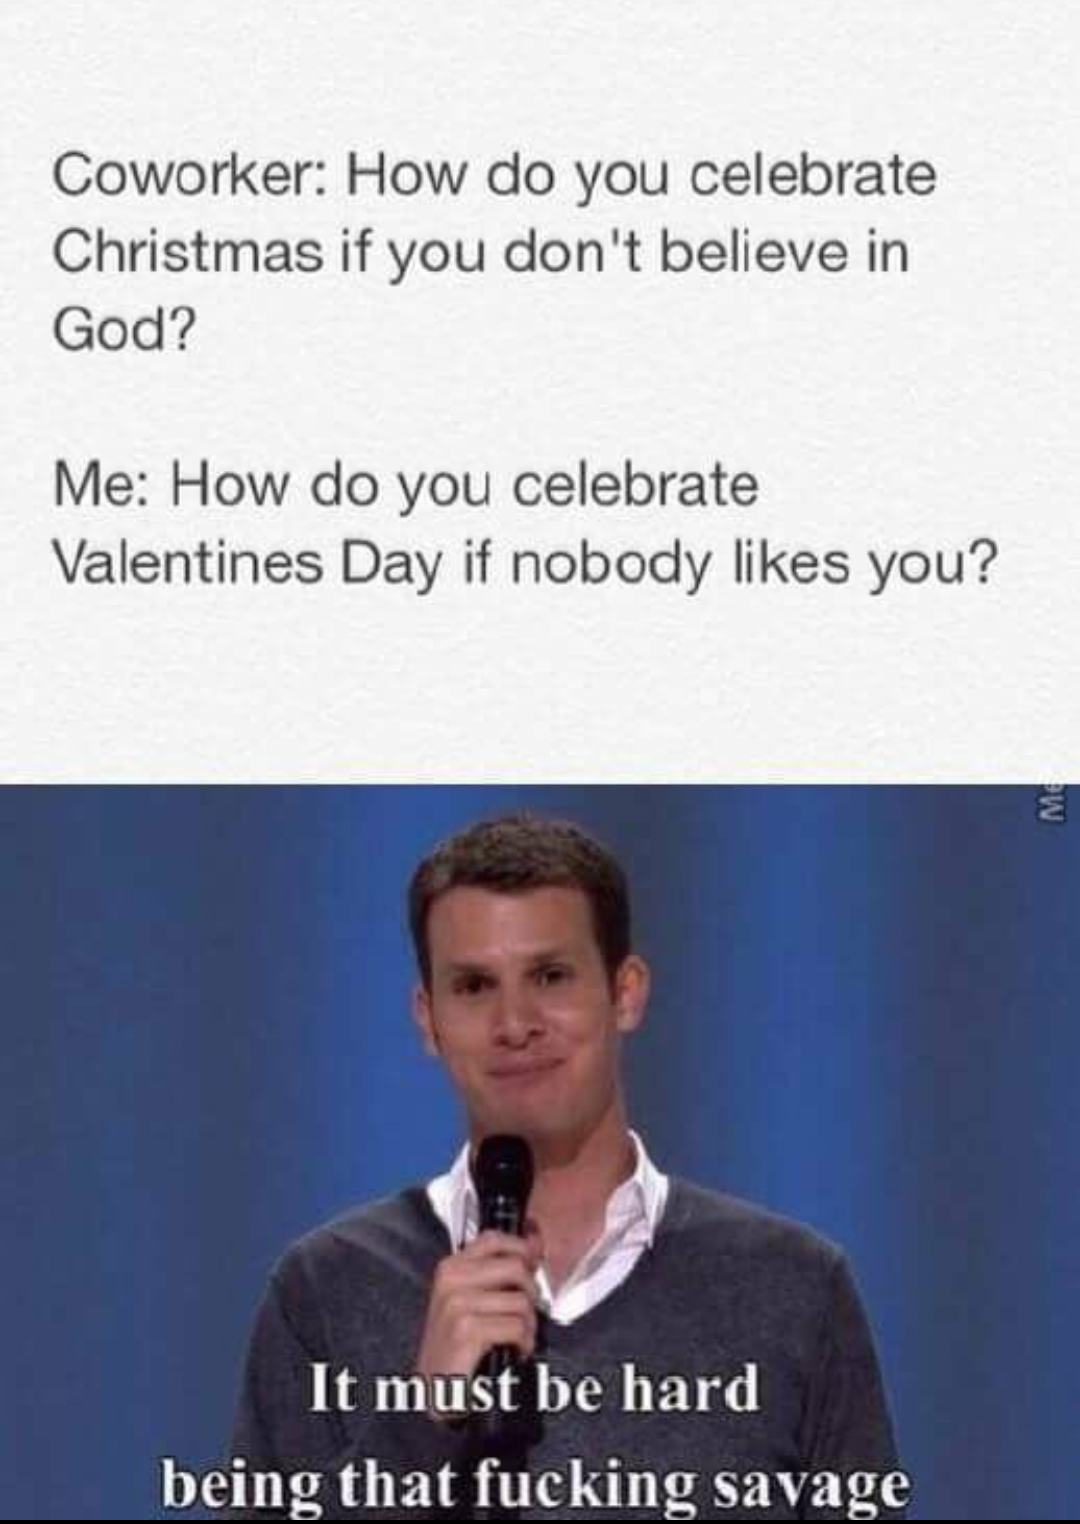 must be that hard being that savage - Coworker How do you celebrate Christmas if you don't believe in God? Me How do you celebrate Valentines Day if nobody you? It must be hard being that fucking savage